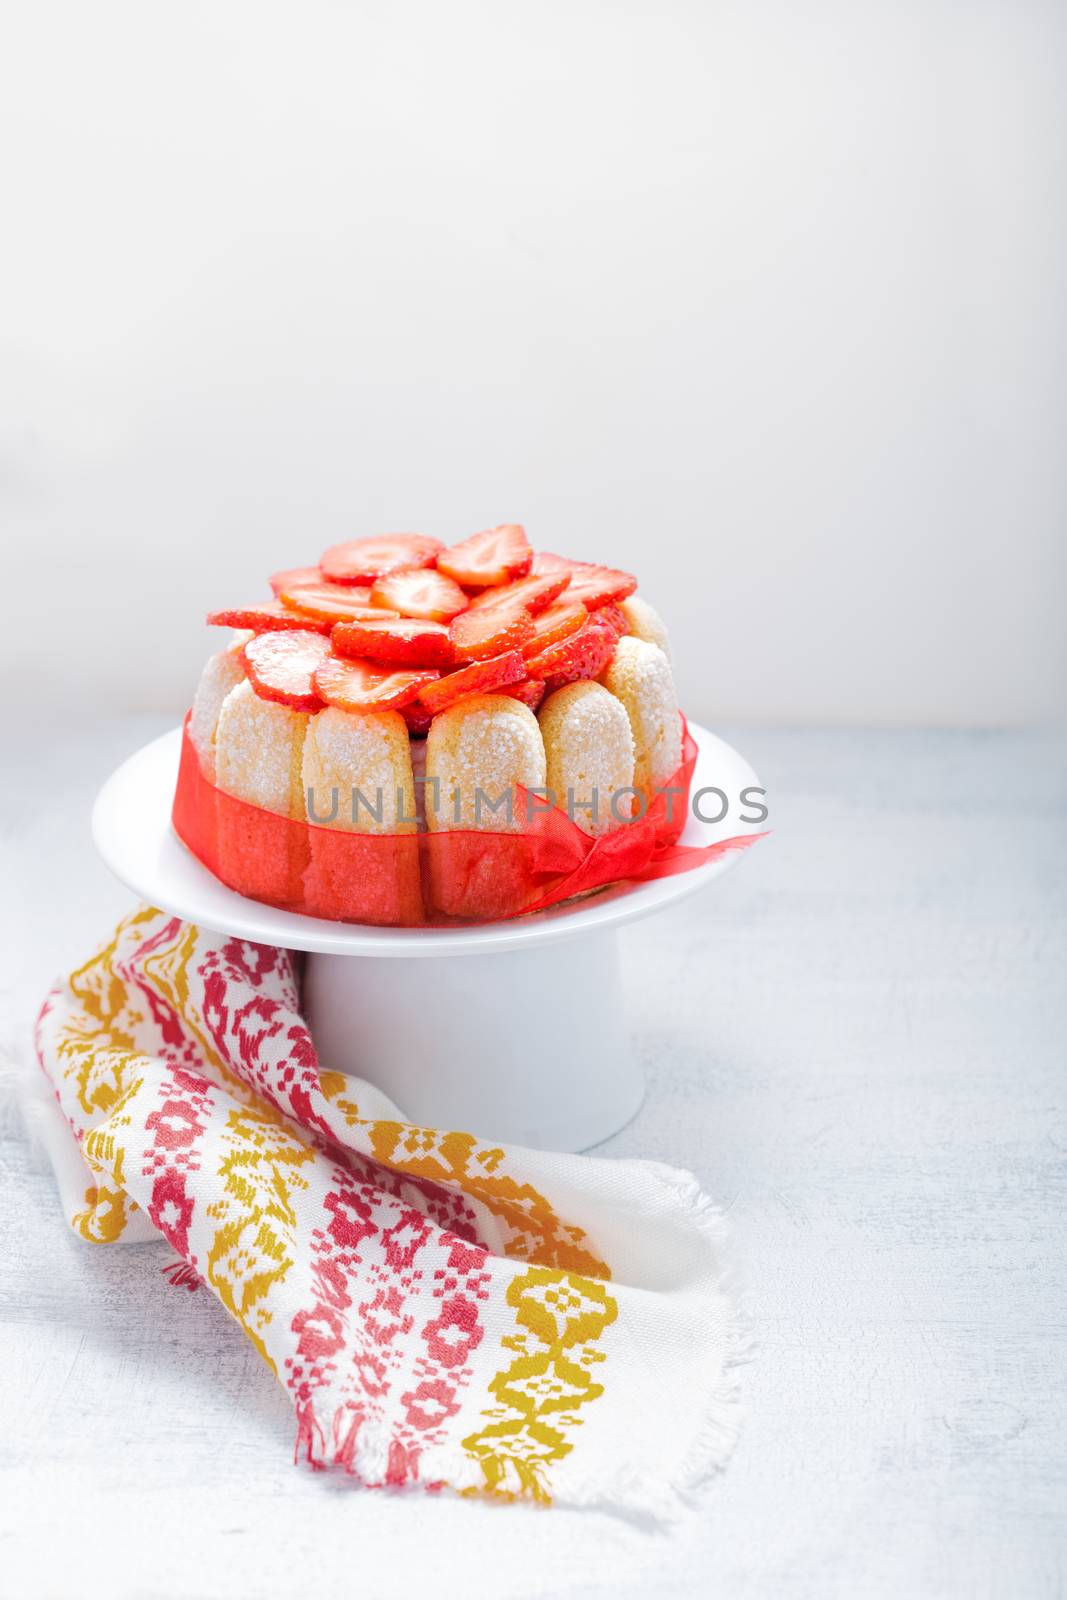 Cake Charlotte with strawberries by supercat67